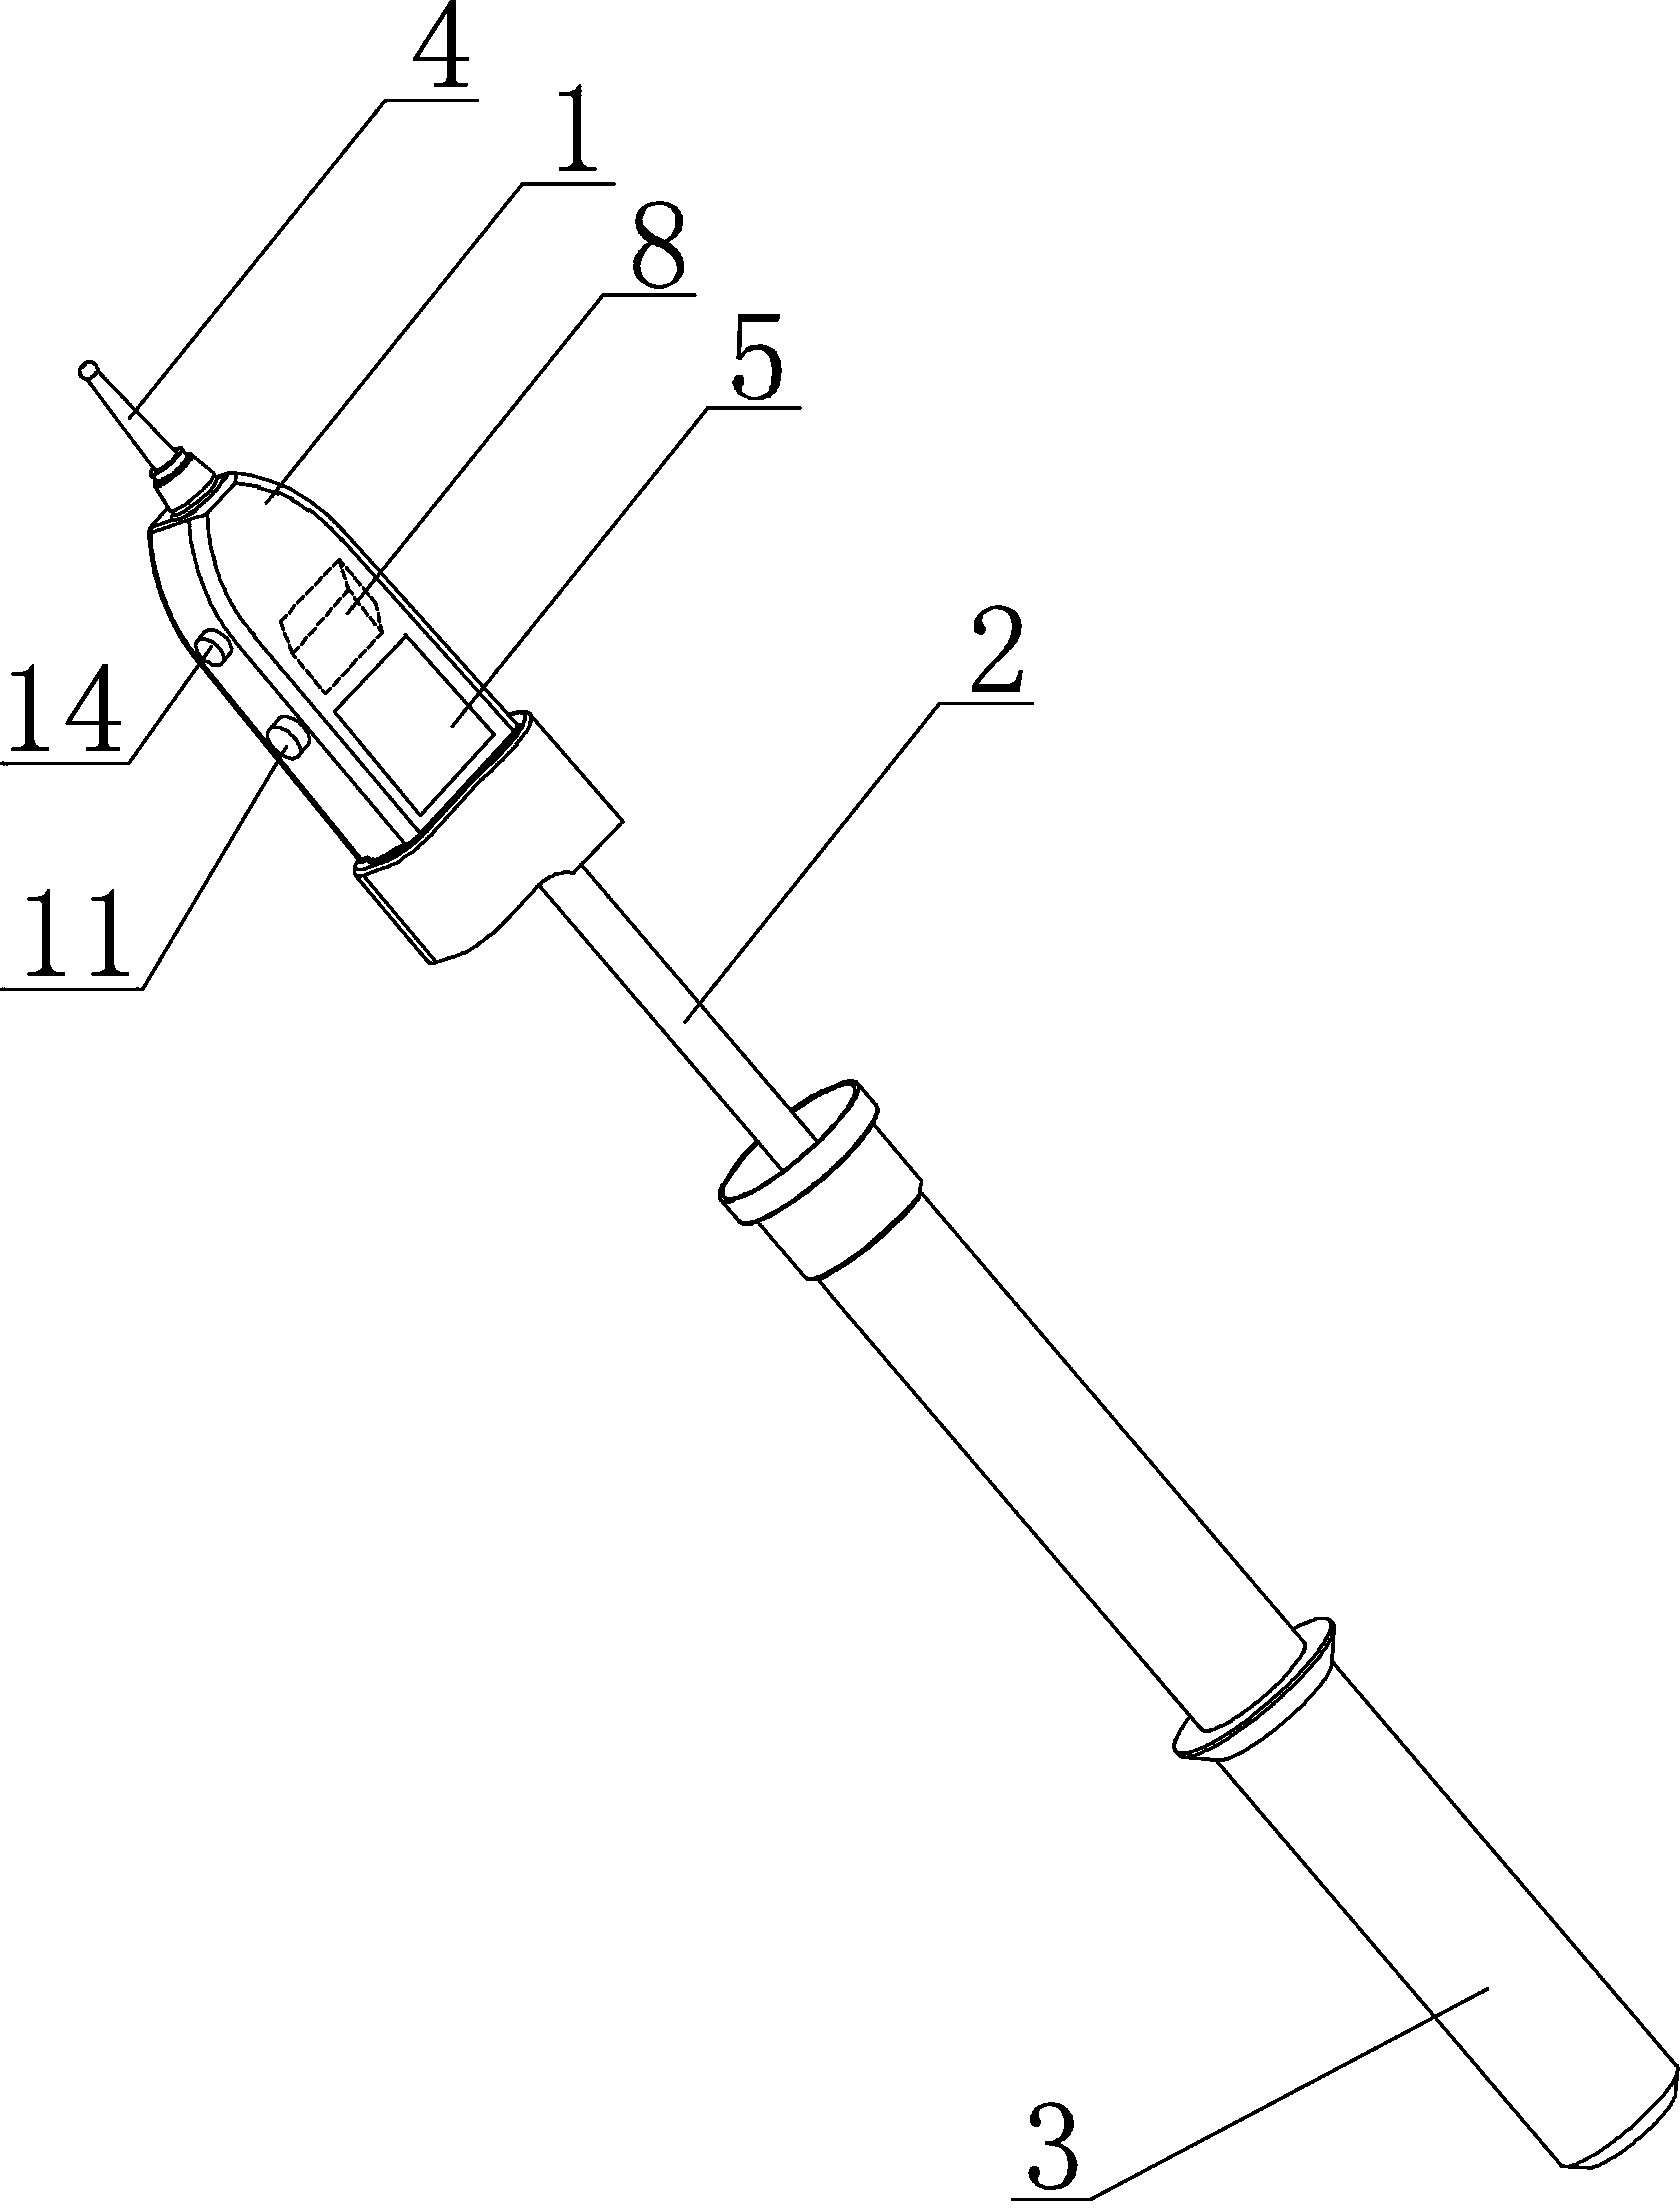 Full-voltage full-loop self-checking capacitive-type electroscope